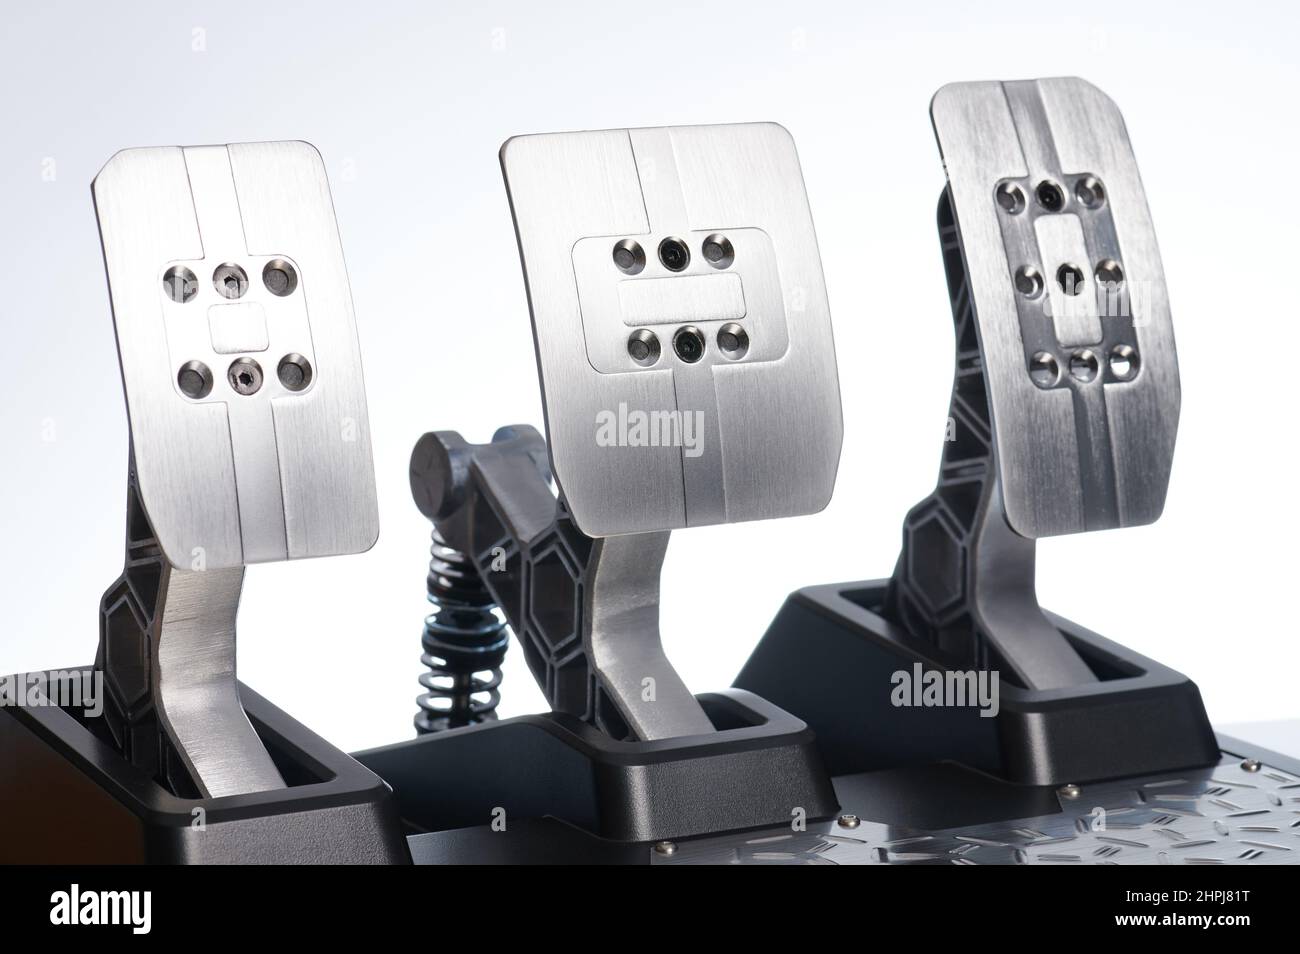 Metal pedals for simulation racing isolated on studio background Stock Photo